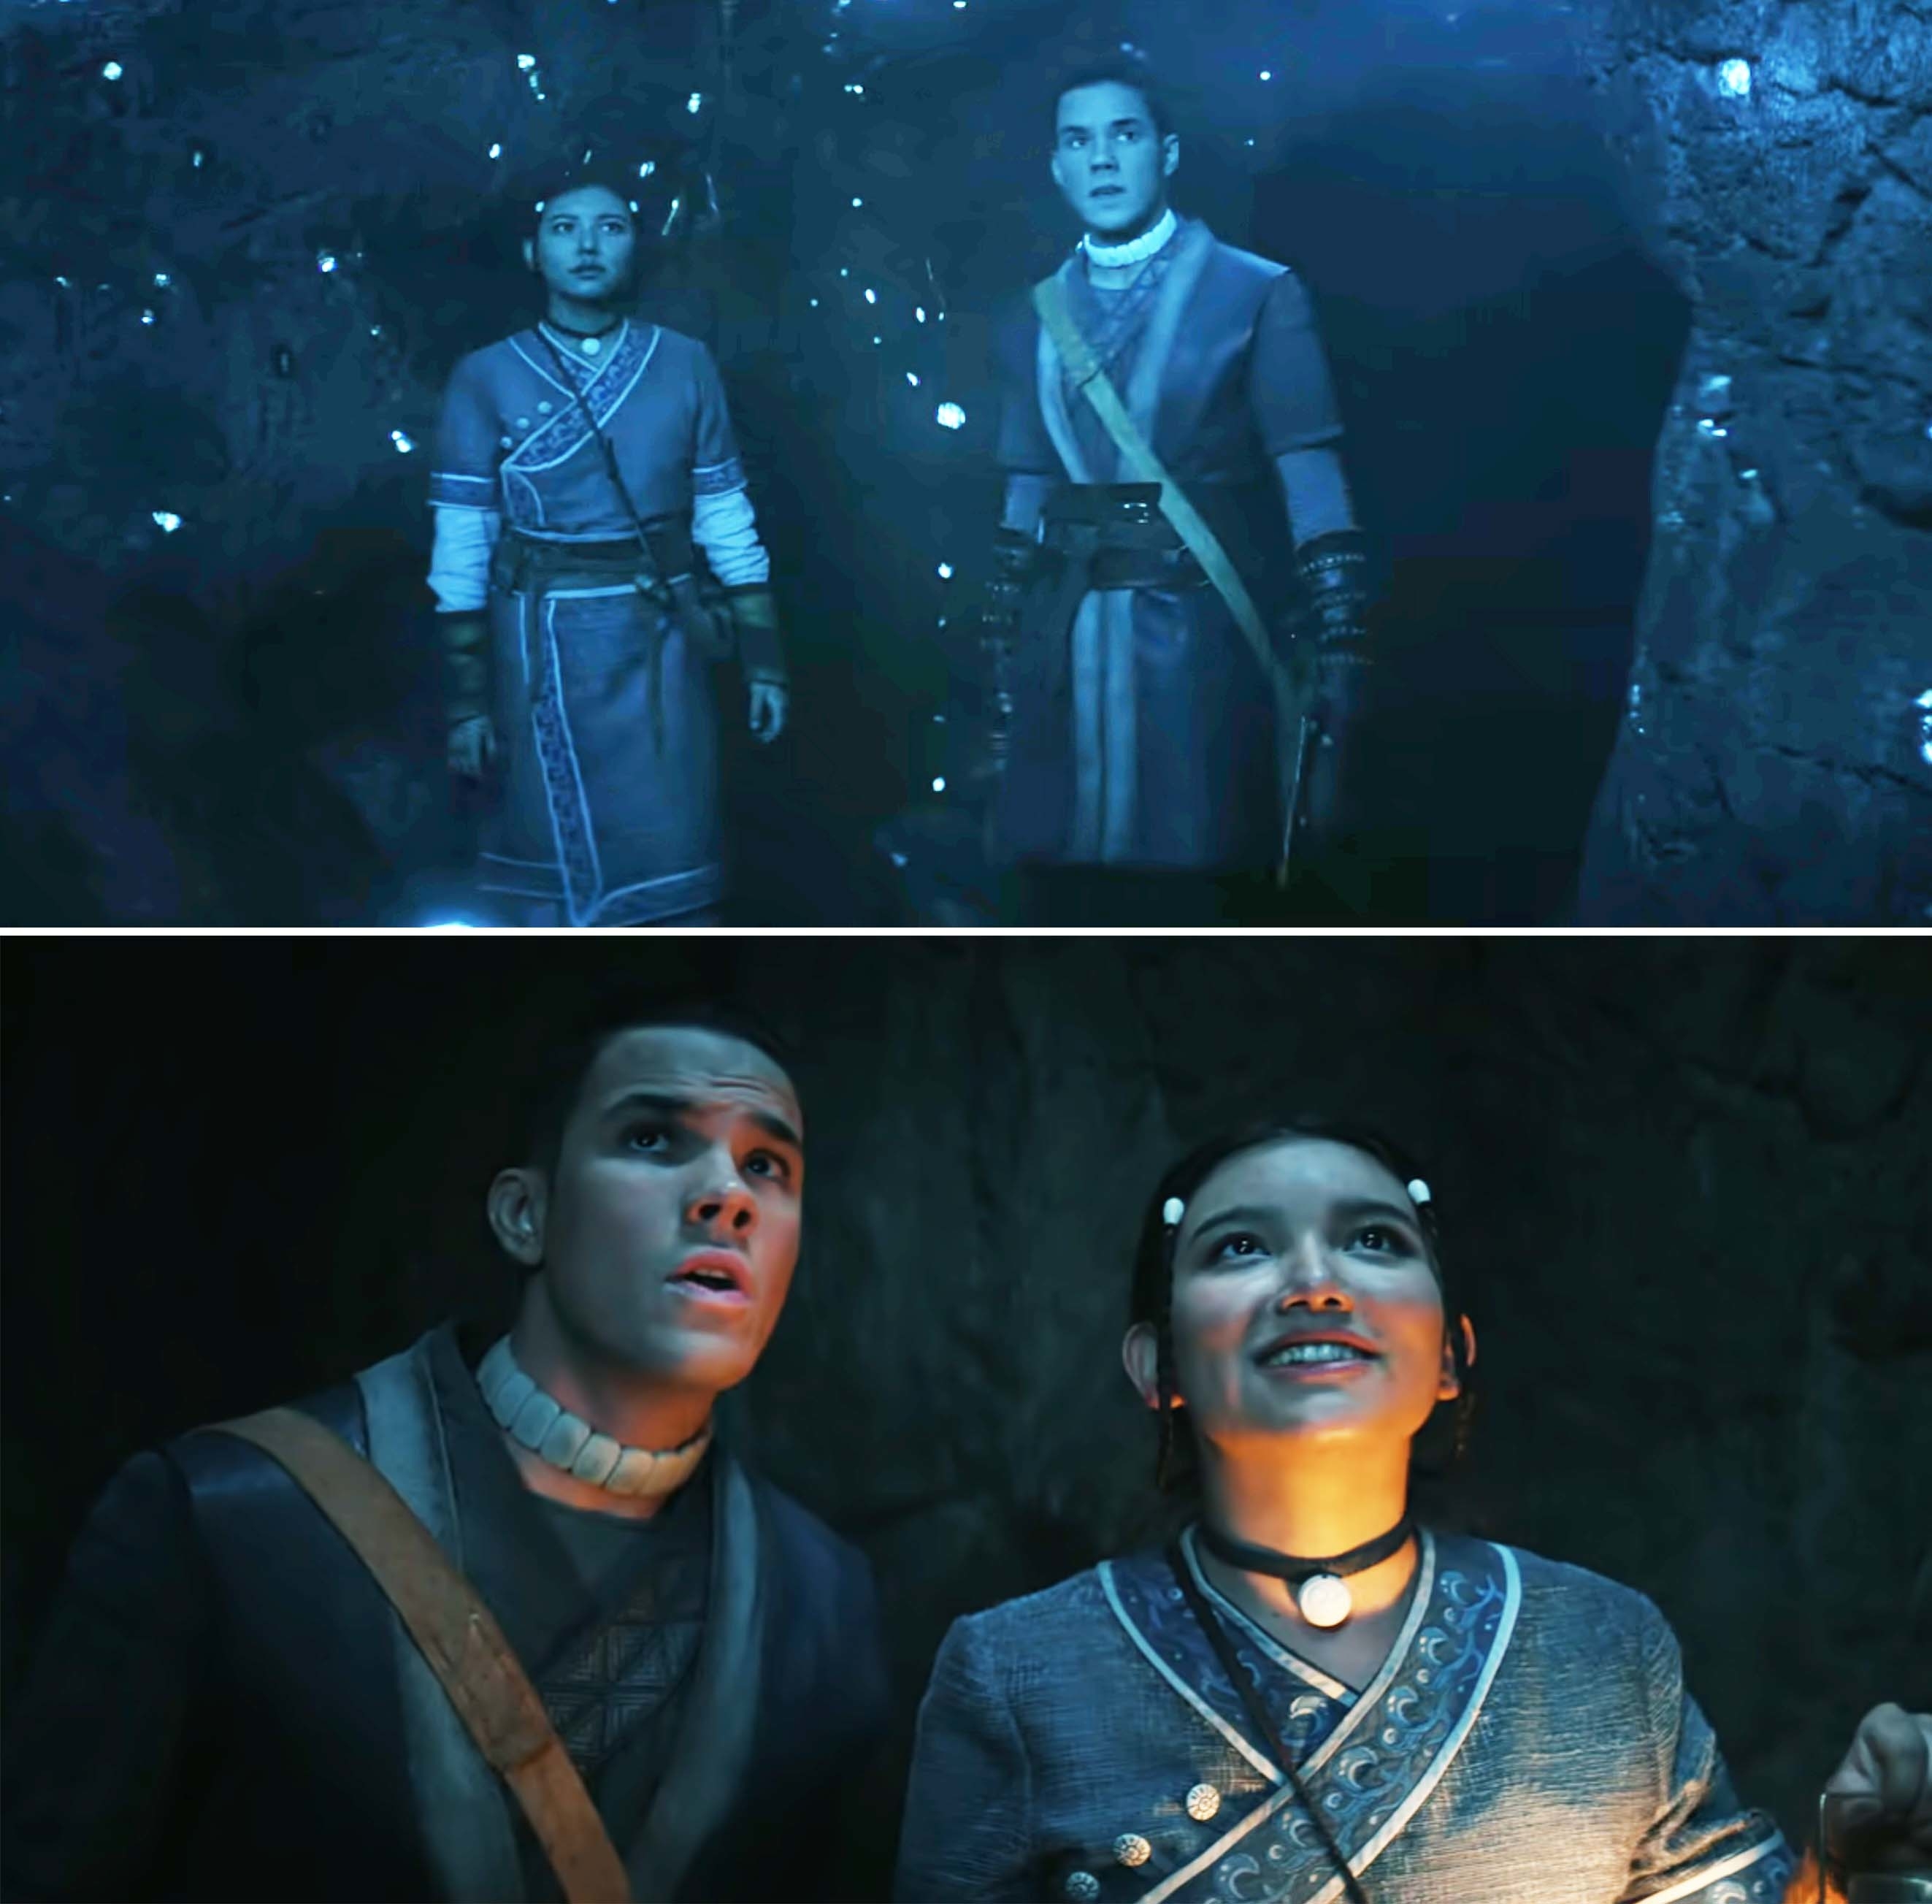 the two characters inside a cave, in awe